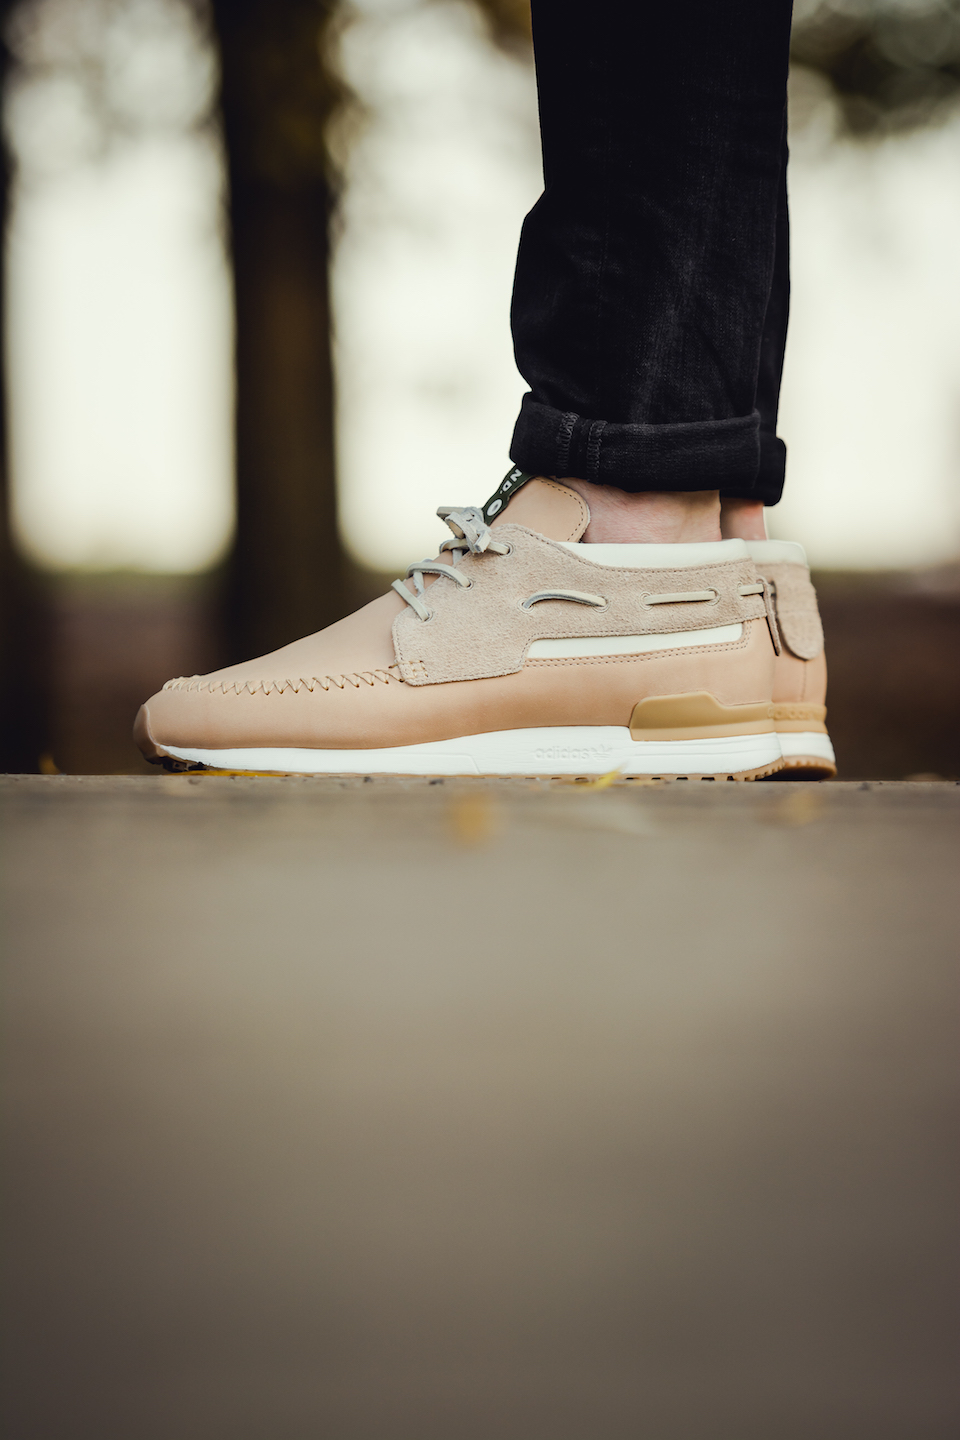 adidas consortium zx 700 boat end clothing collaboration